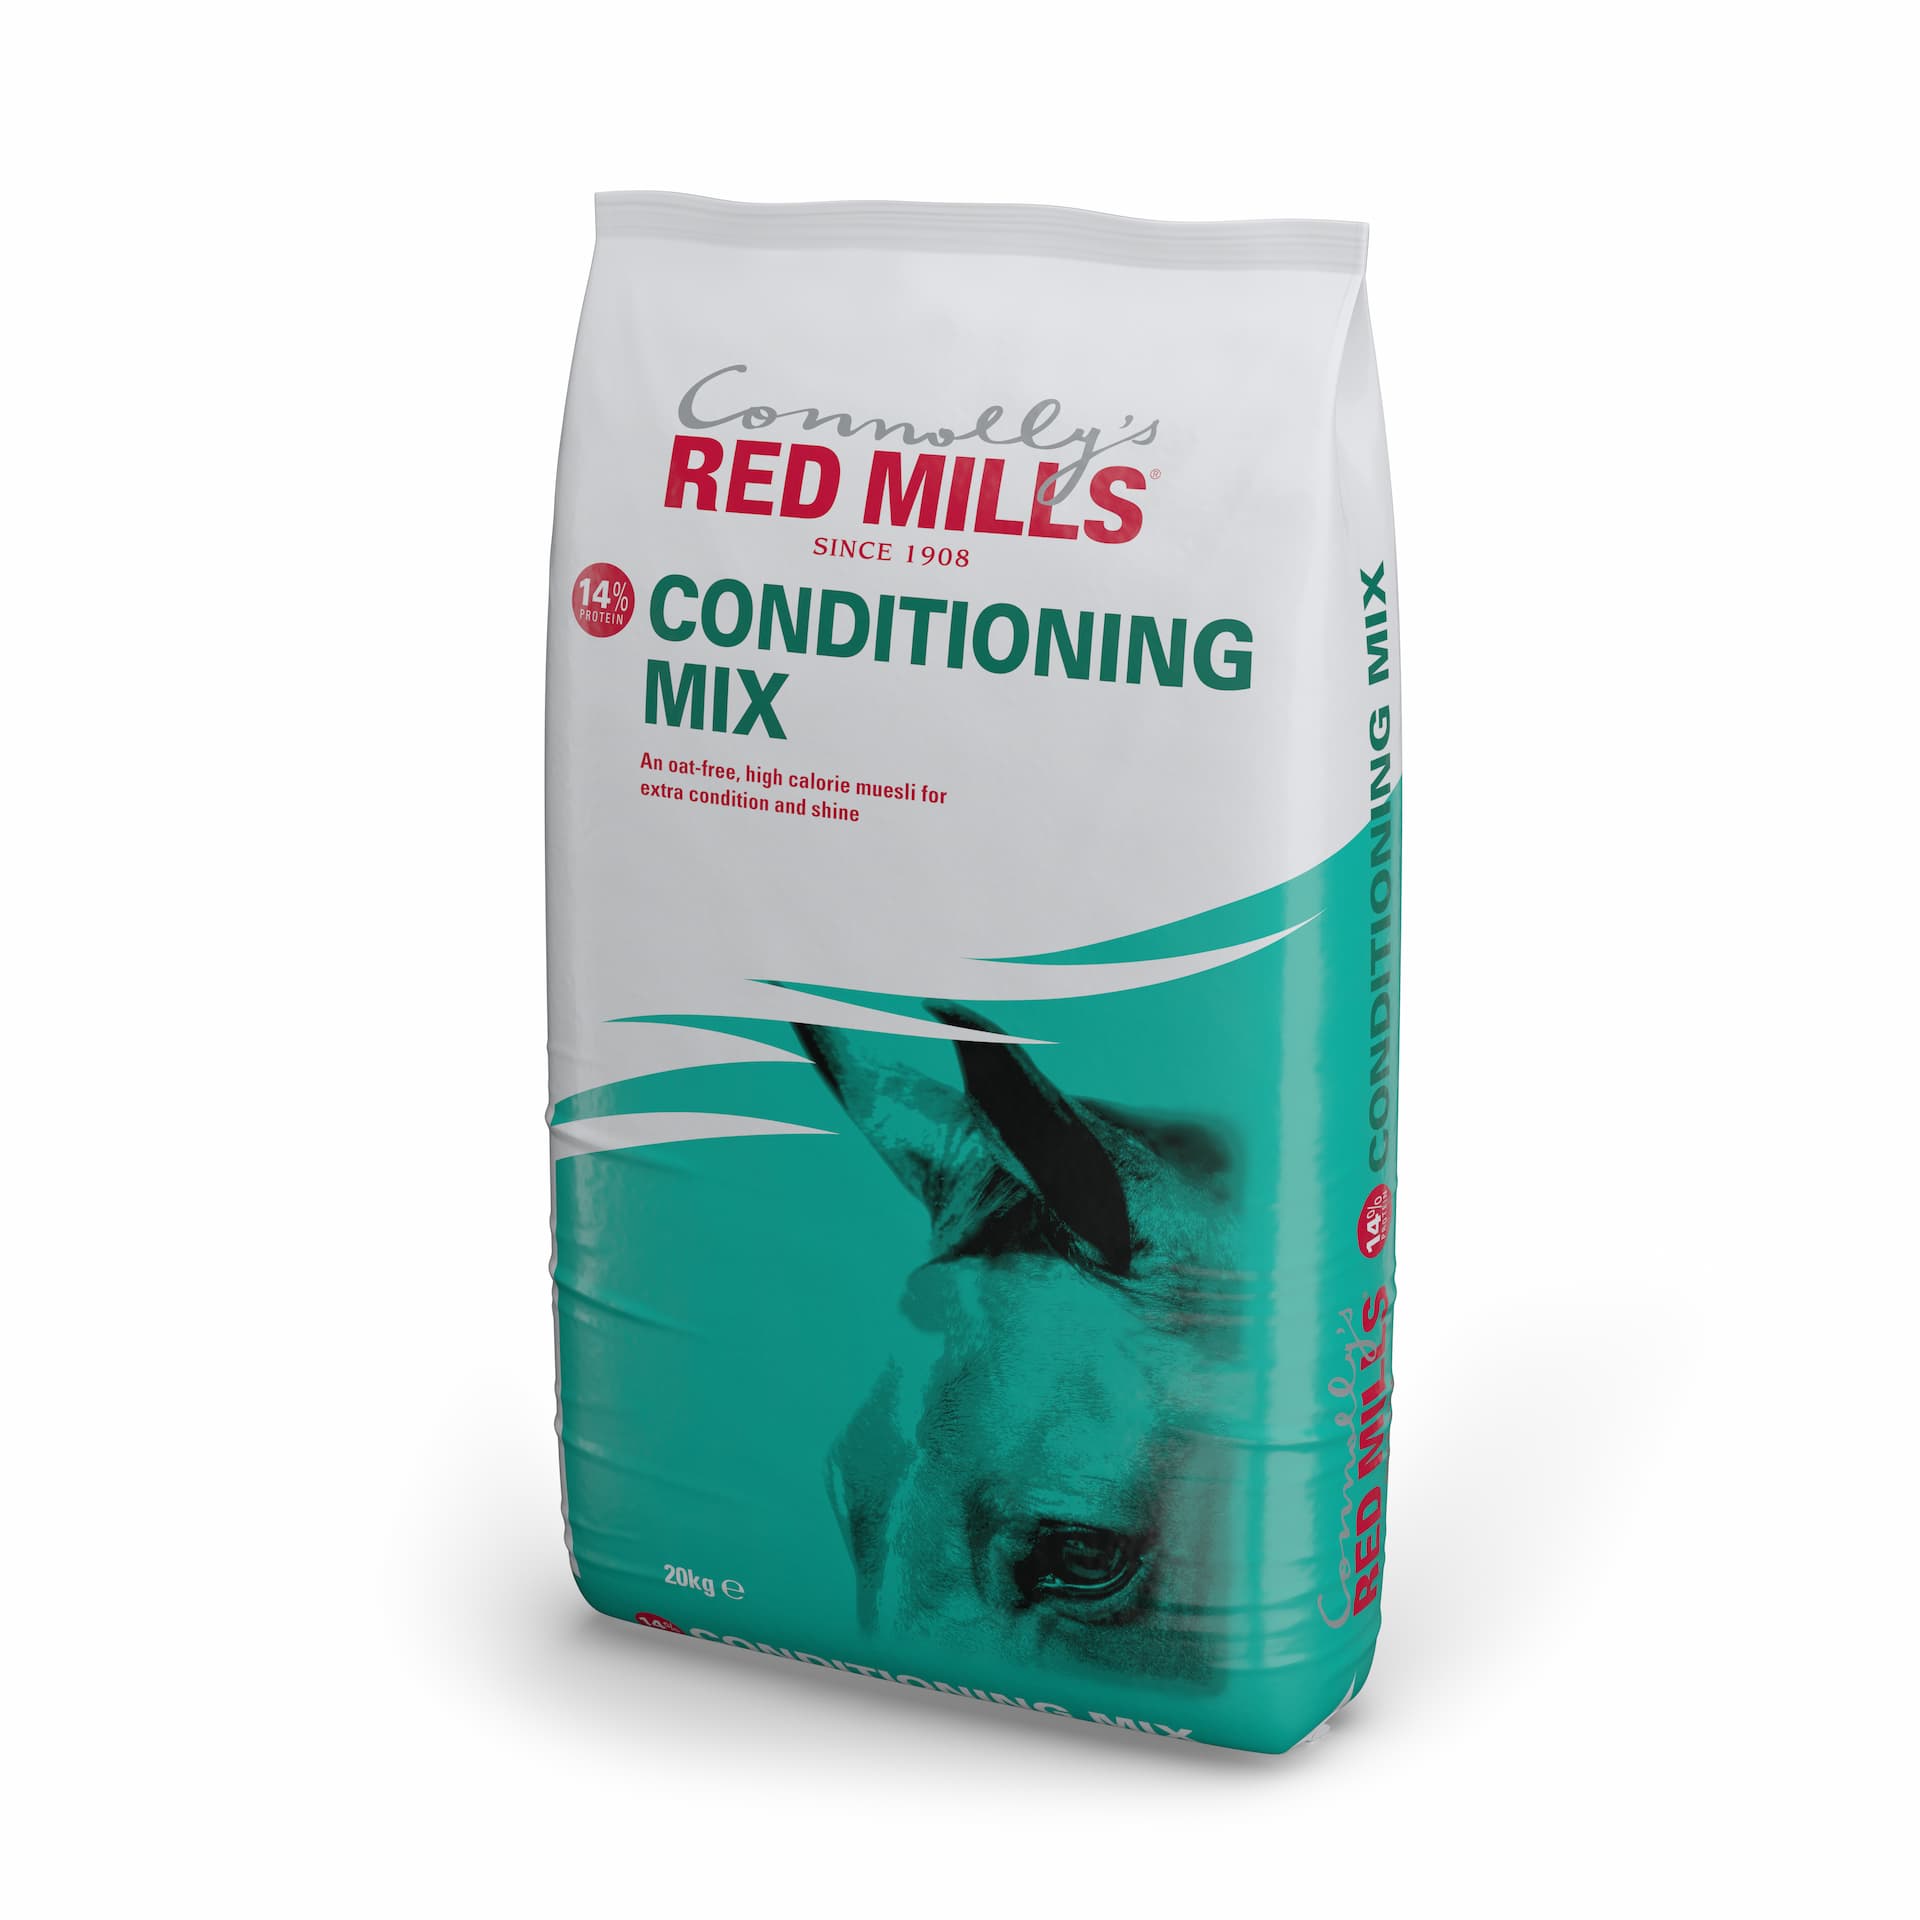 14% Conditioning Mix